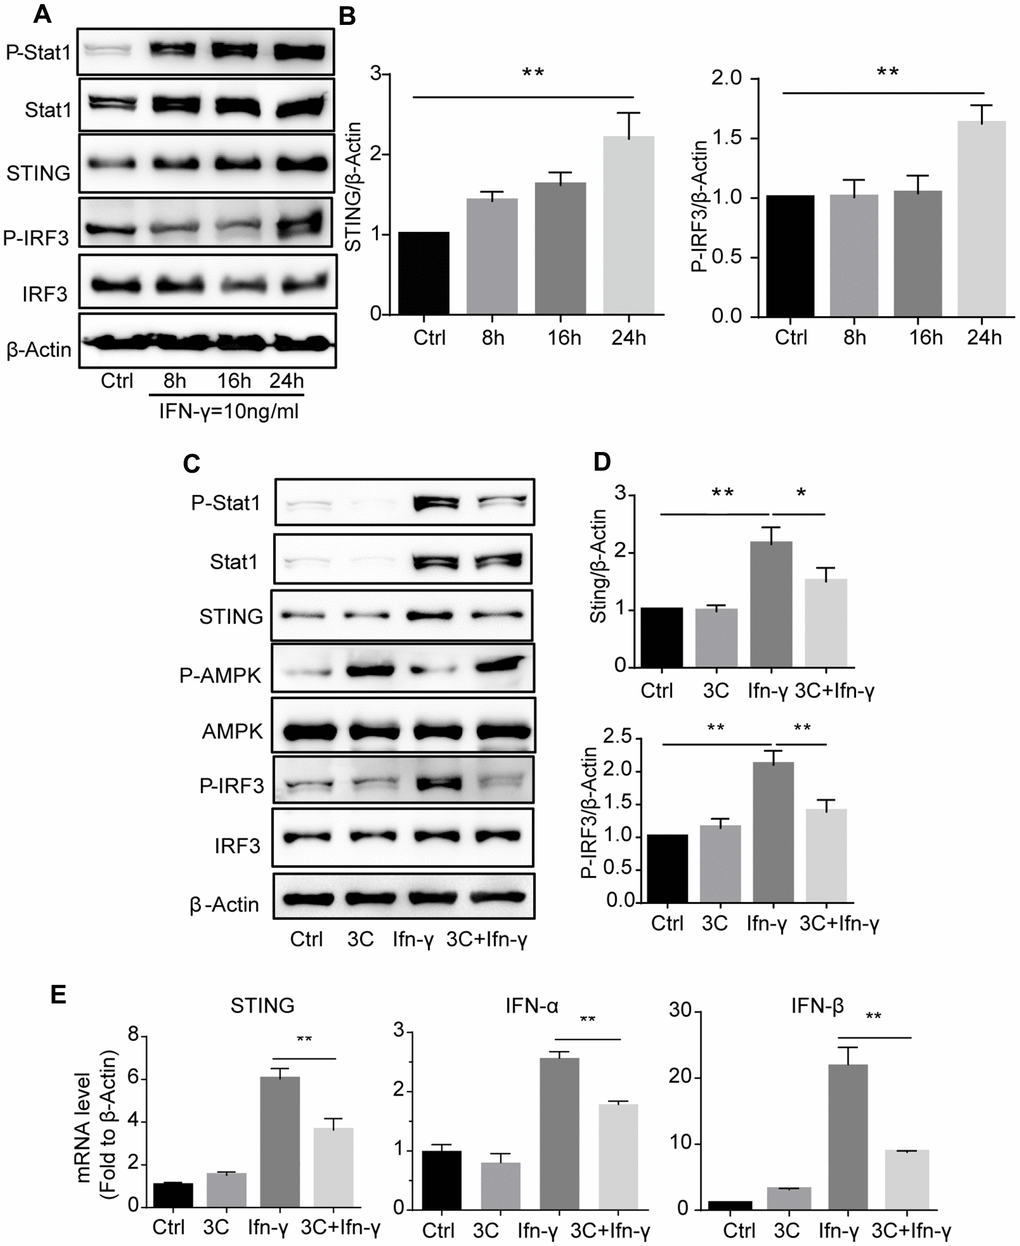 3C inhibits IFN-γ stimulated JAK2-STAT1 signaling and downstream signaling in AMPK dependent manner. (A) IFN-γ time-dependently induce phosphorylation of Stat1 and initiate downstream STING-IRF3 signaling. (B) Quantitative results for the relative level of STING and P-IRF3 normalized to β-Actin (n=3 per group). (C) 3C activate AMPK and inhibit IFN-γ stimulated Jak-Stat1 and downstream STING-IRF3 signaling. (D) Relative level of STING, P-IRF3 normalized to β-Actin (n=3 per group). (E) Relative gene expression of STING, IFN-α, IFN-β normalize to β-Actin. Results are expressed as means ± SEM (n = 3). *P**P